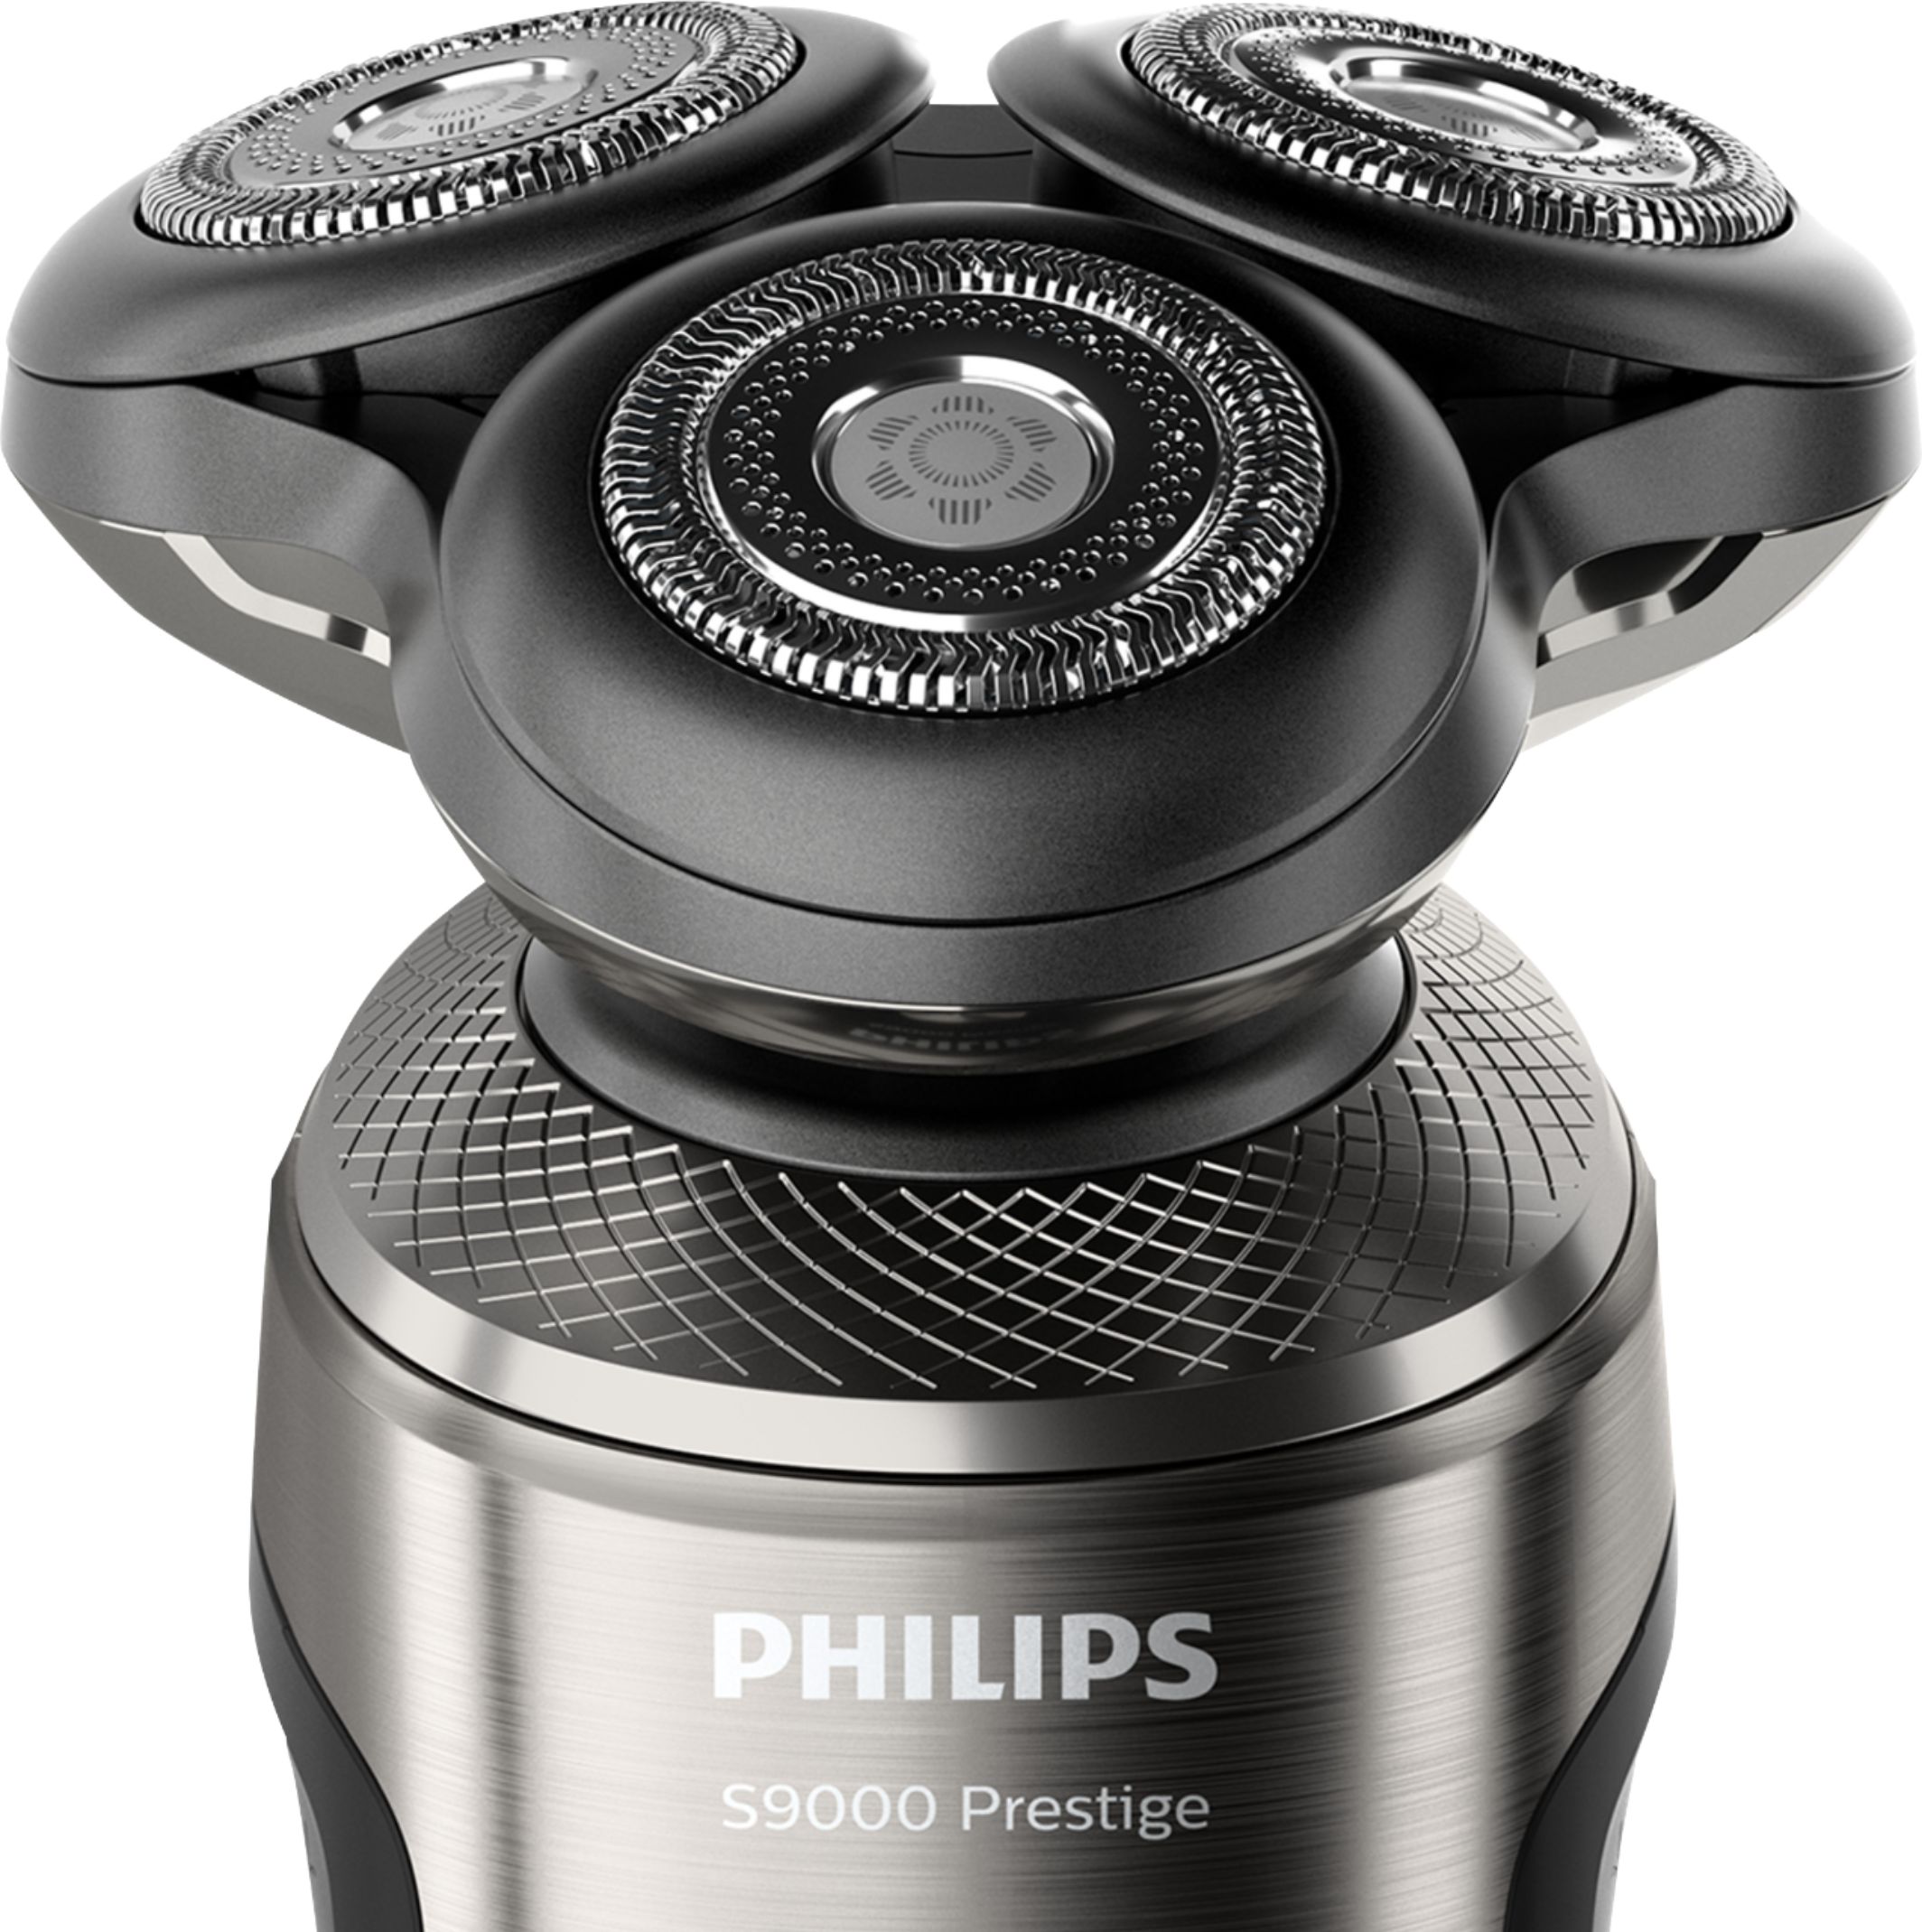 Angle View: Braun - Series 5 53B Electric Shaver Head for Series 5 and Series 6 shavers - Black